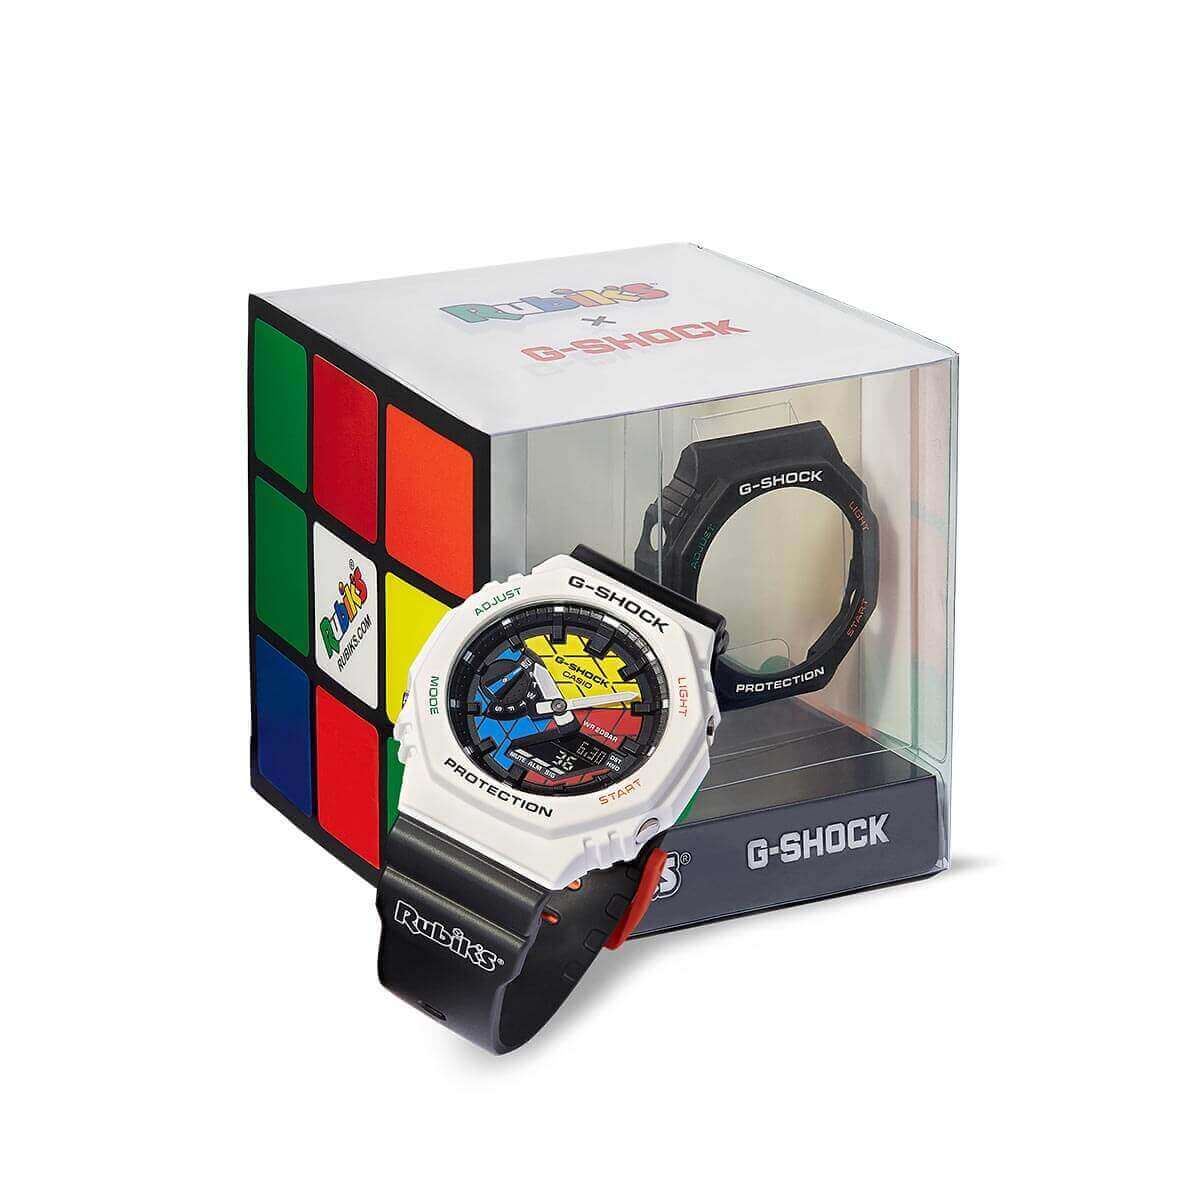 Rubik's Cube x G-Shock GAE-2100RC-1A with the six colors of the 